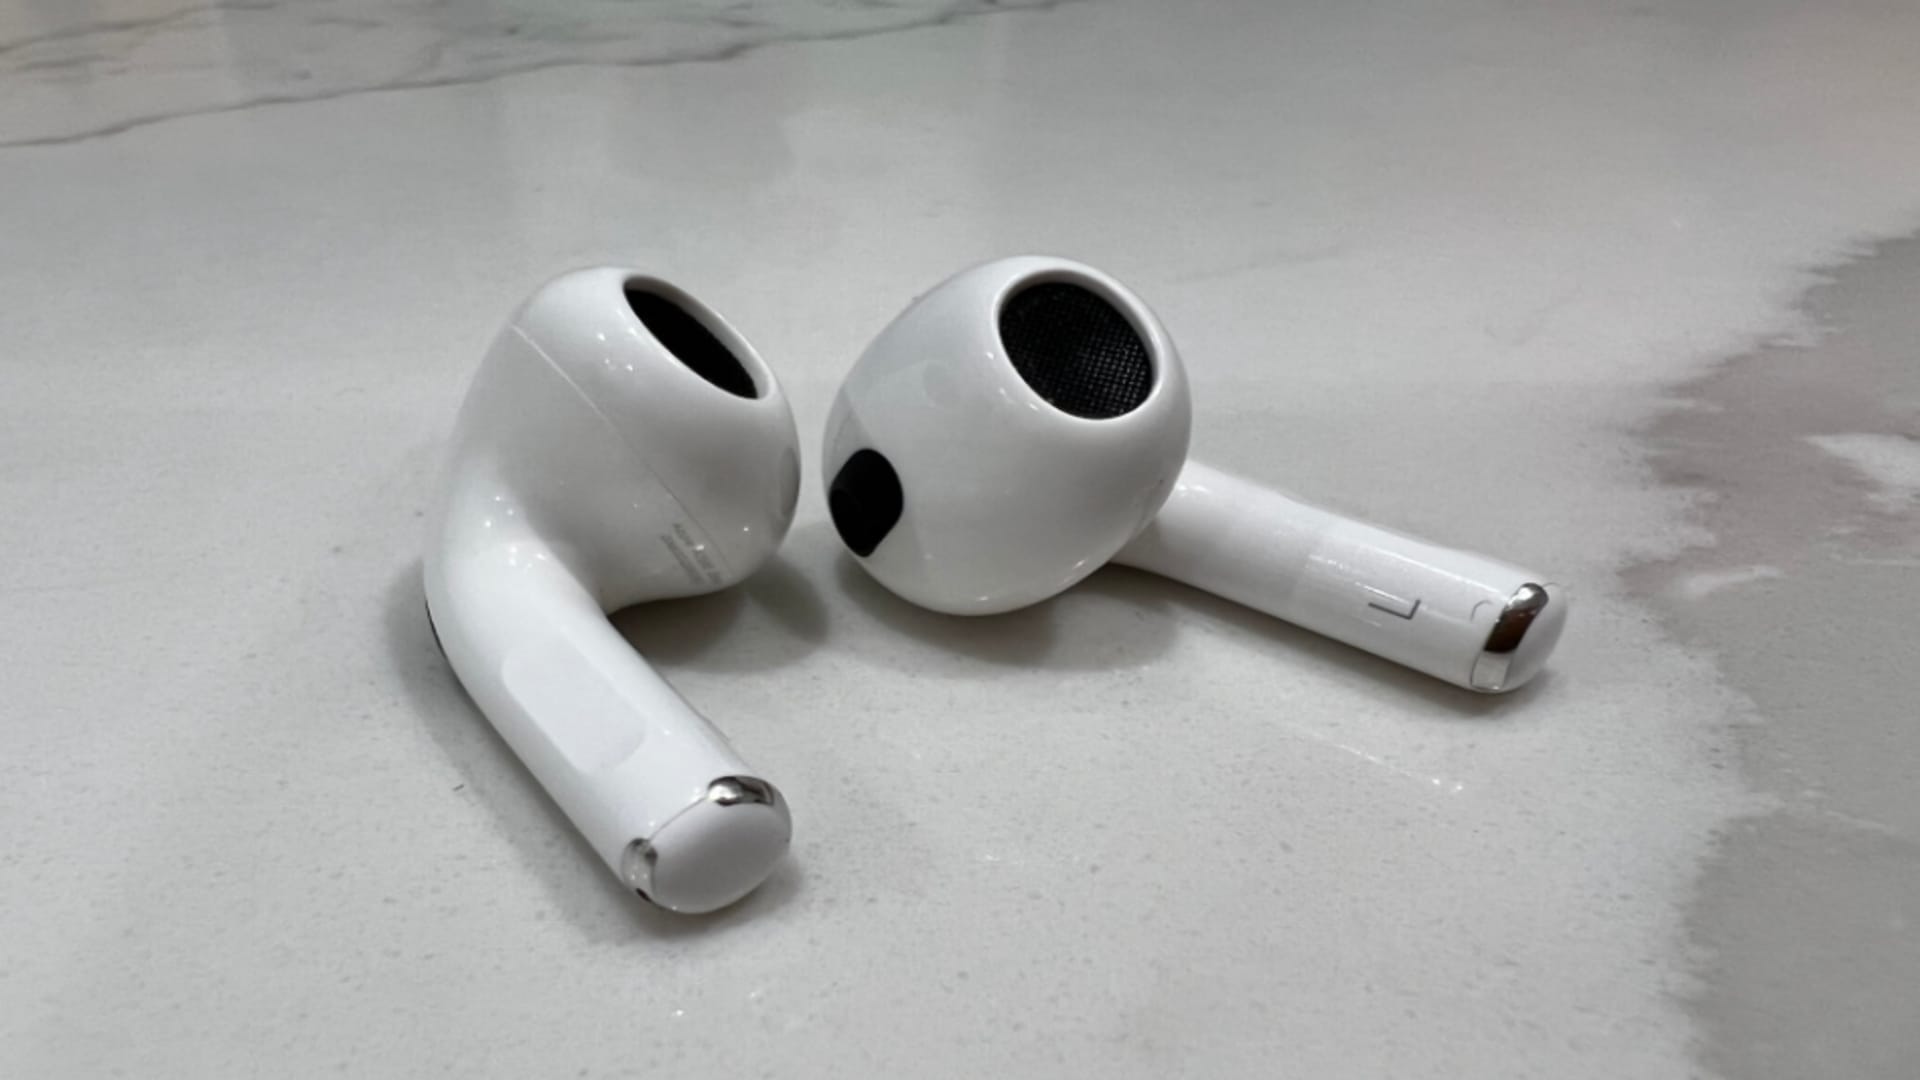 Apple reportedly in talks to make AirPods and Beats in India